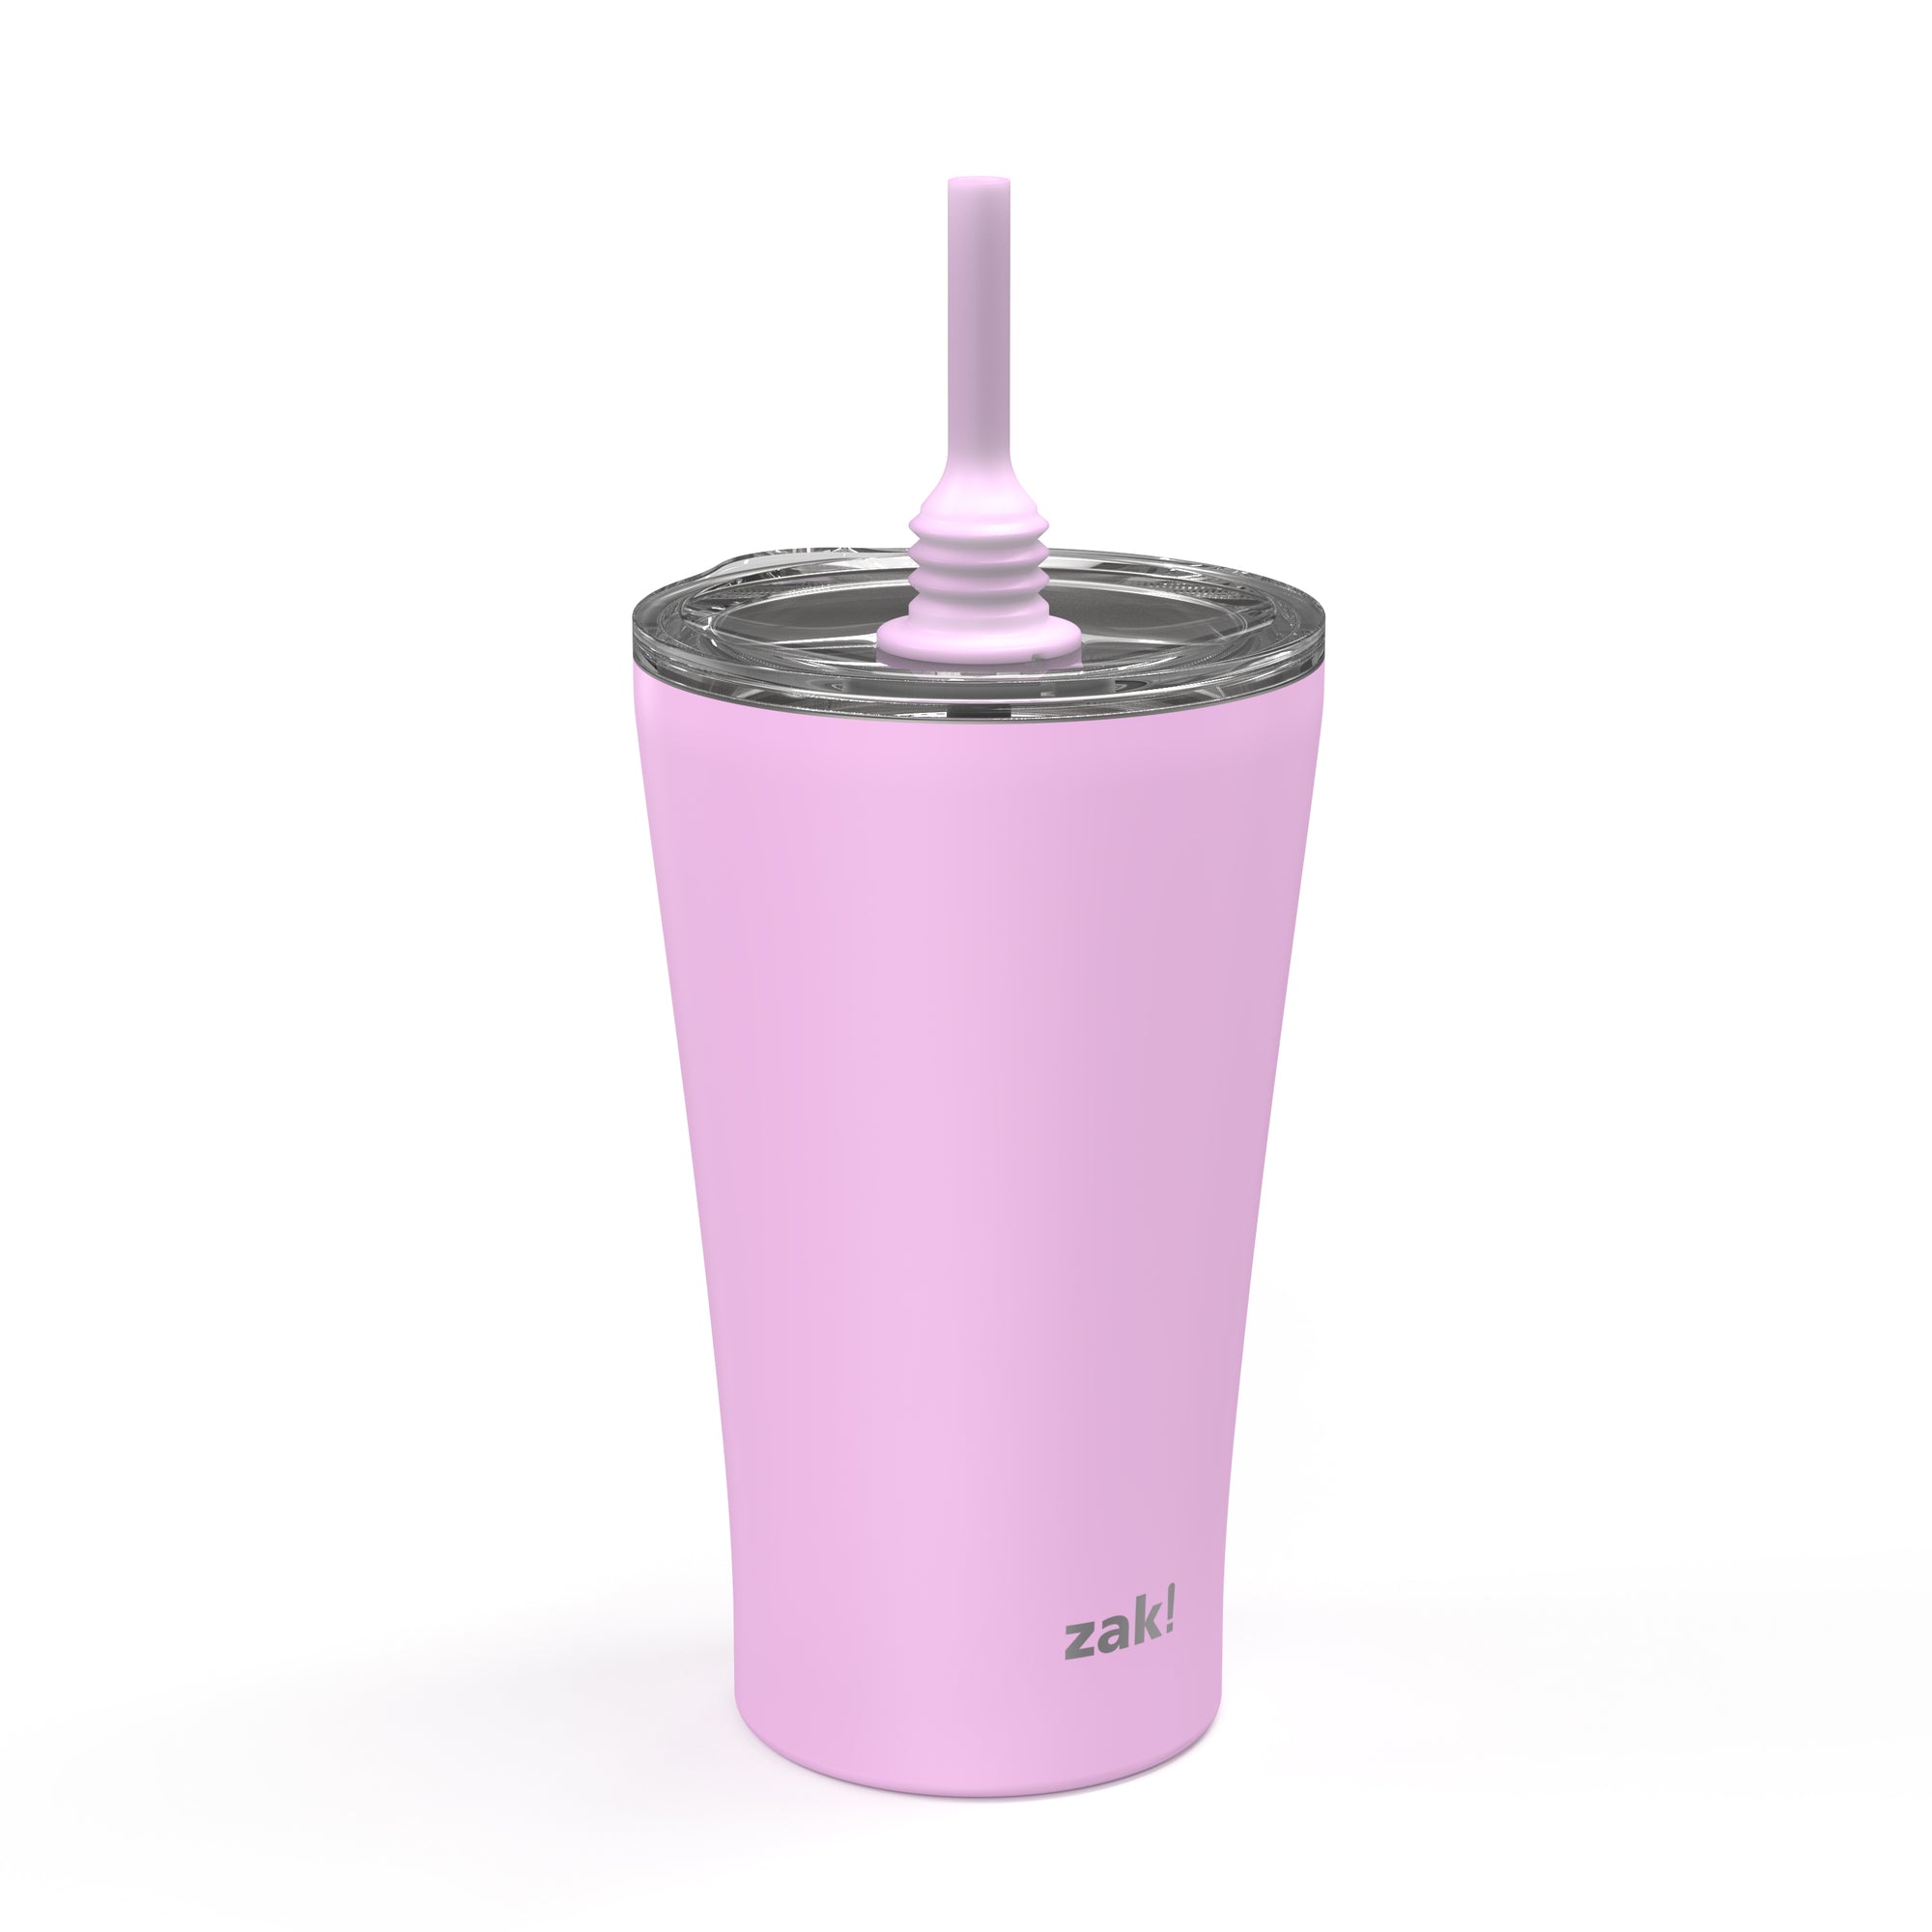 Alfalfa Vacuum Insulated Stainless Steel Straw Tumbler - Lilac, 20 Ounce